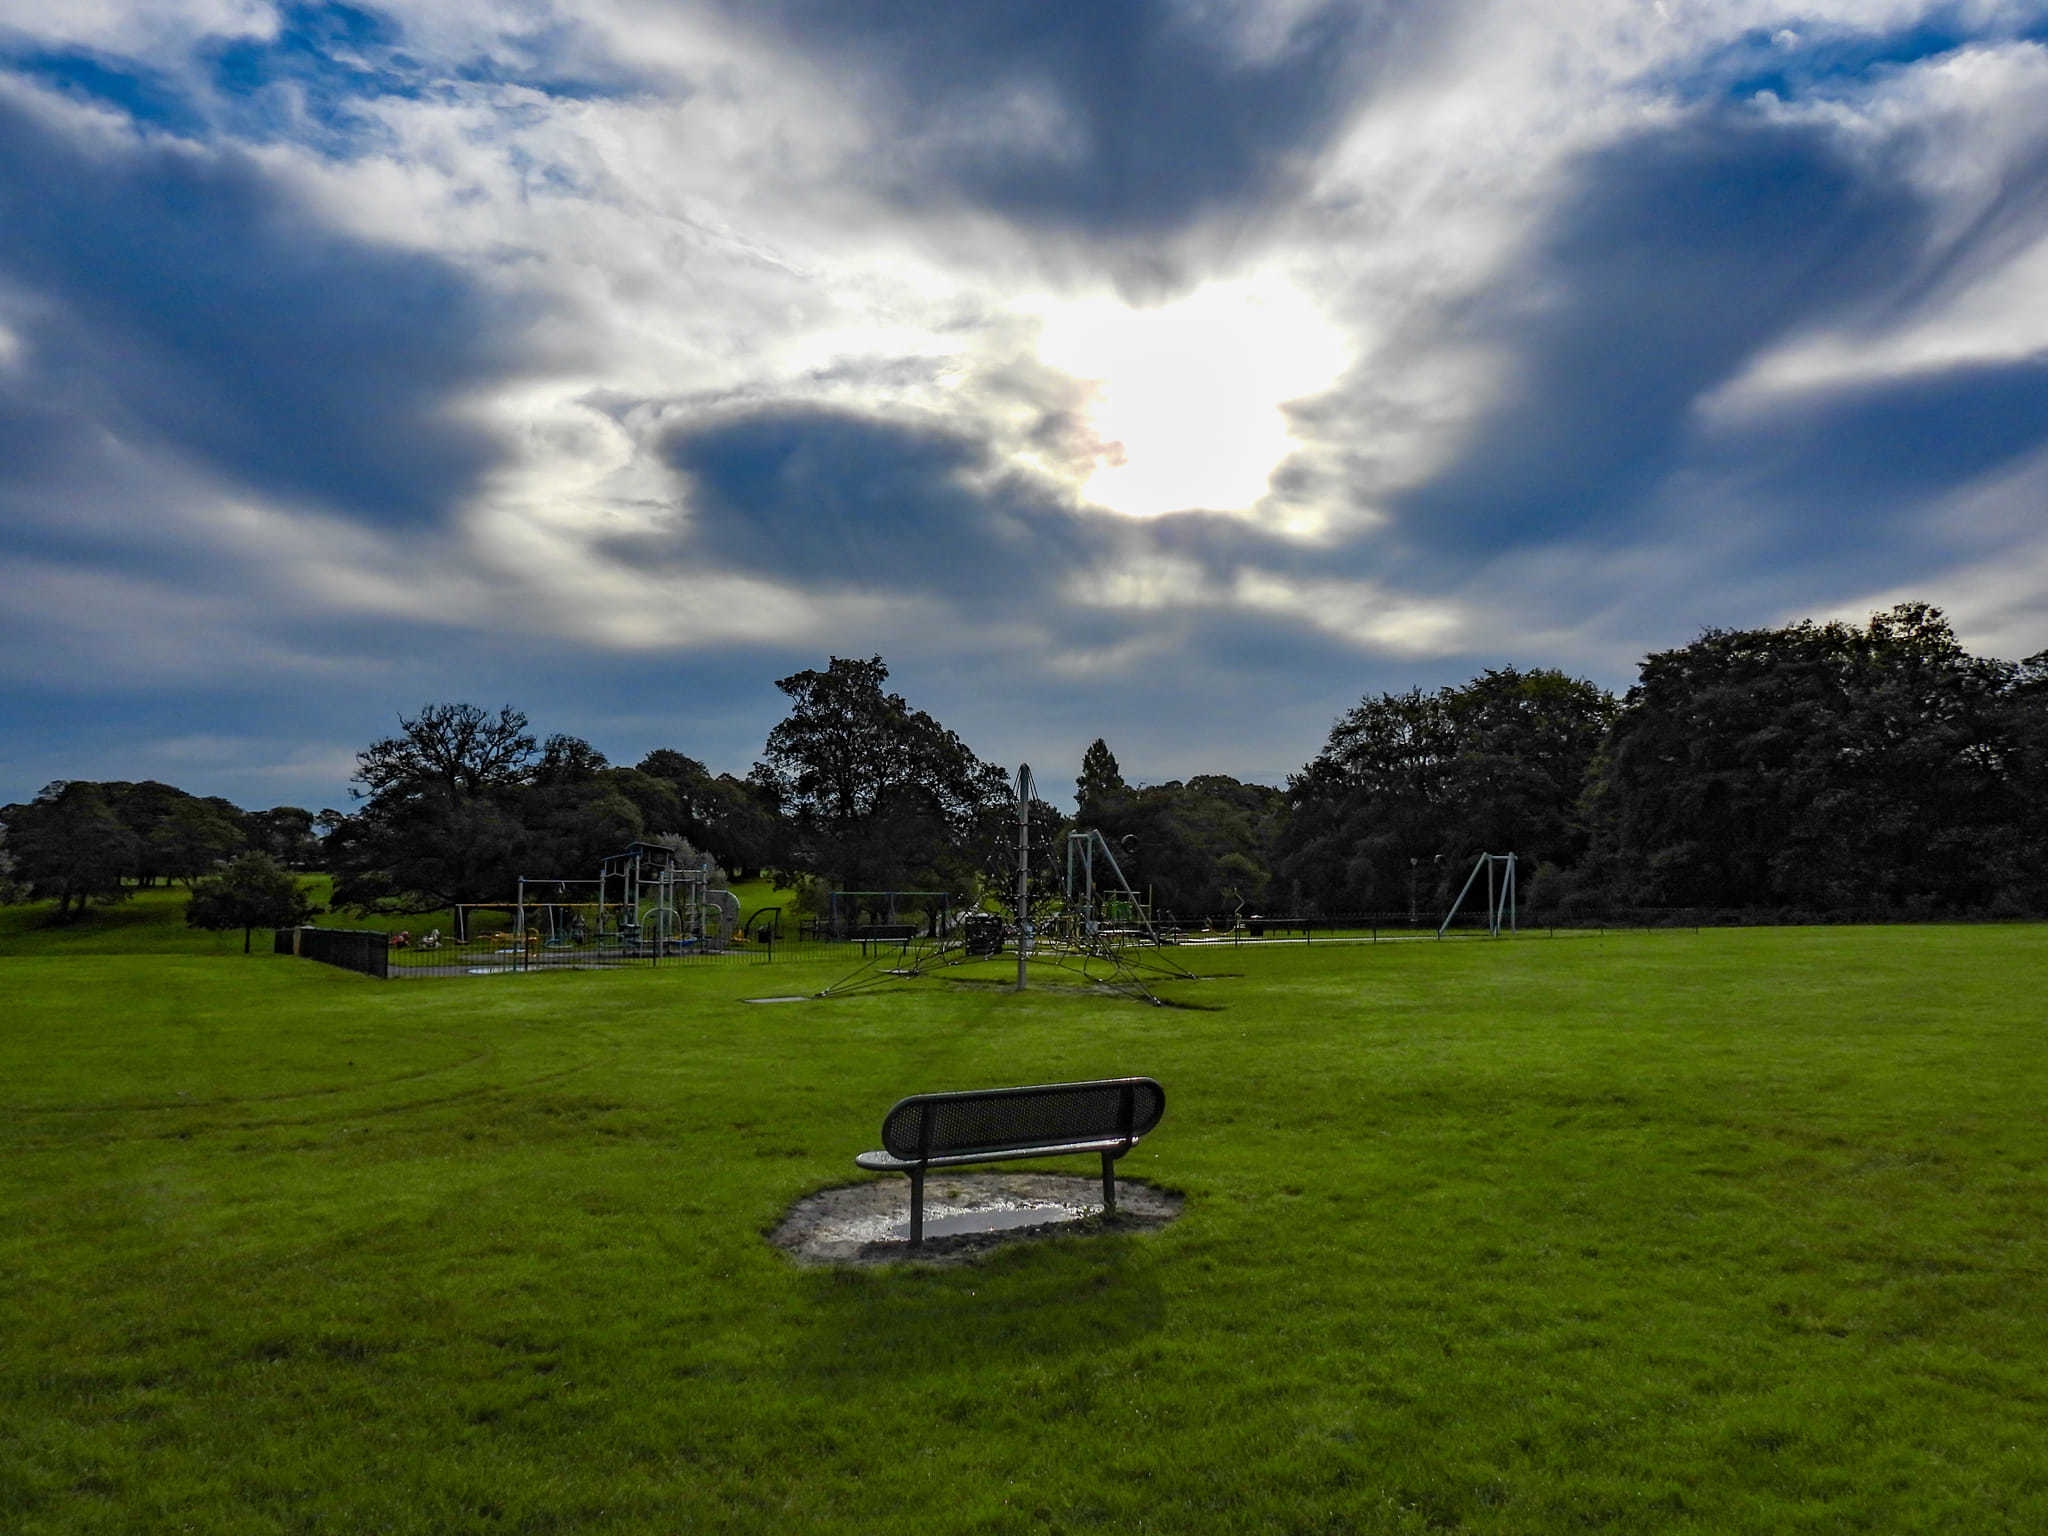 After the rain at Sherdley Park by Chris Shaw